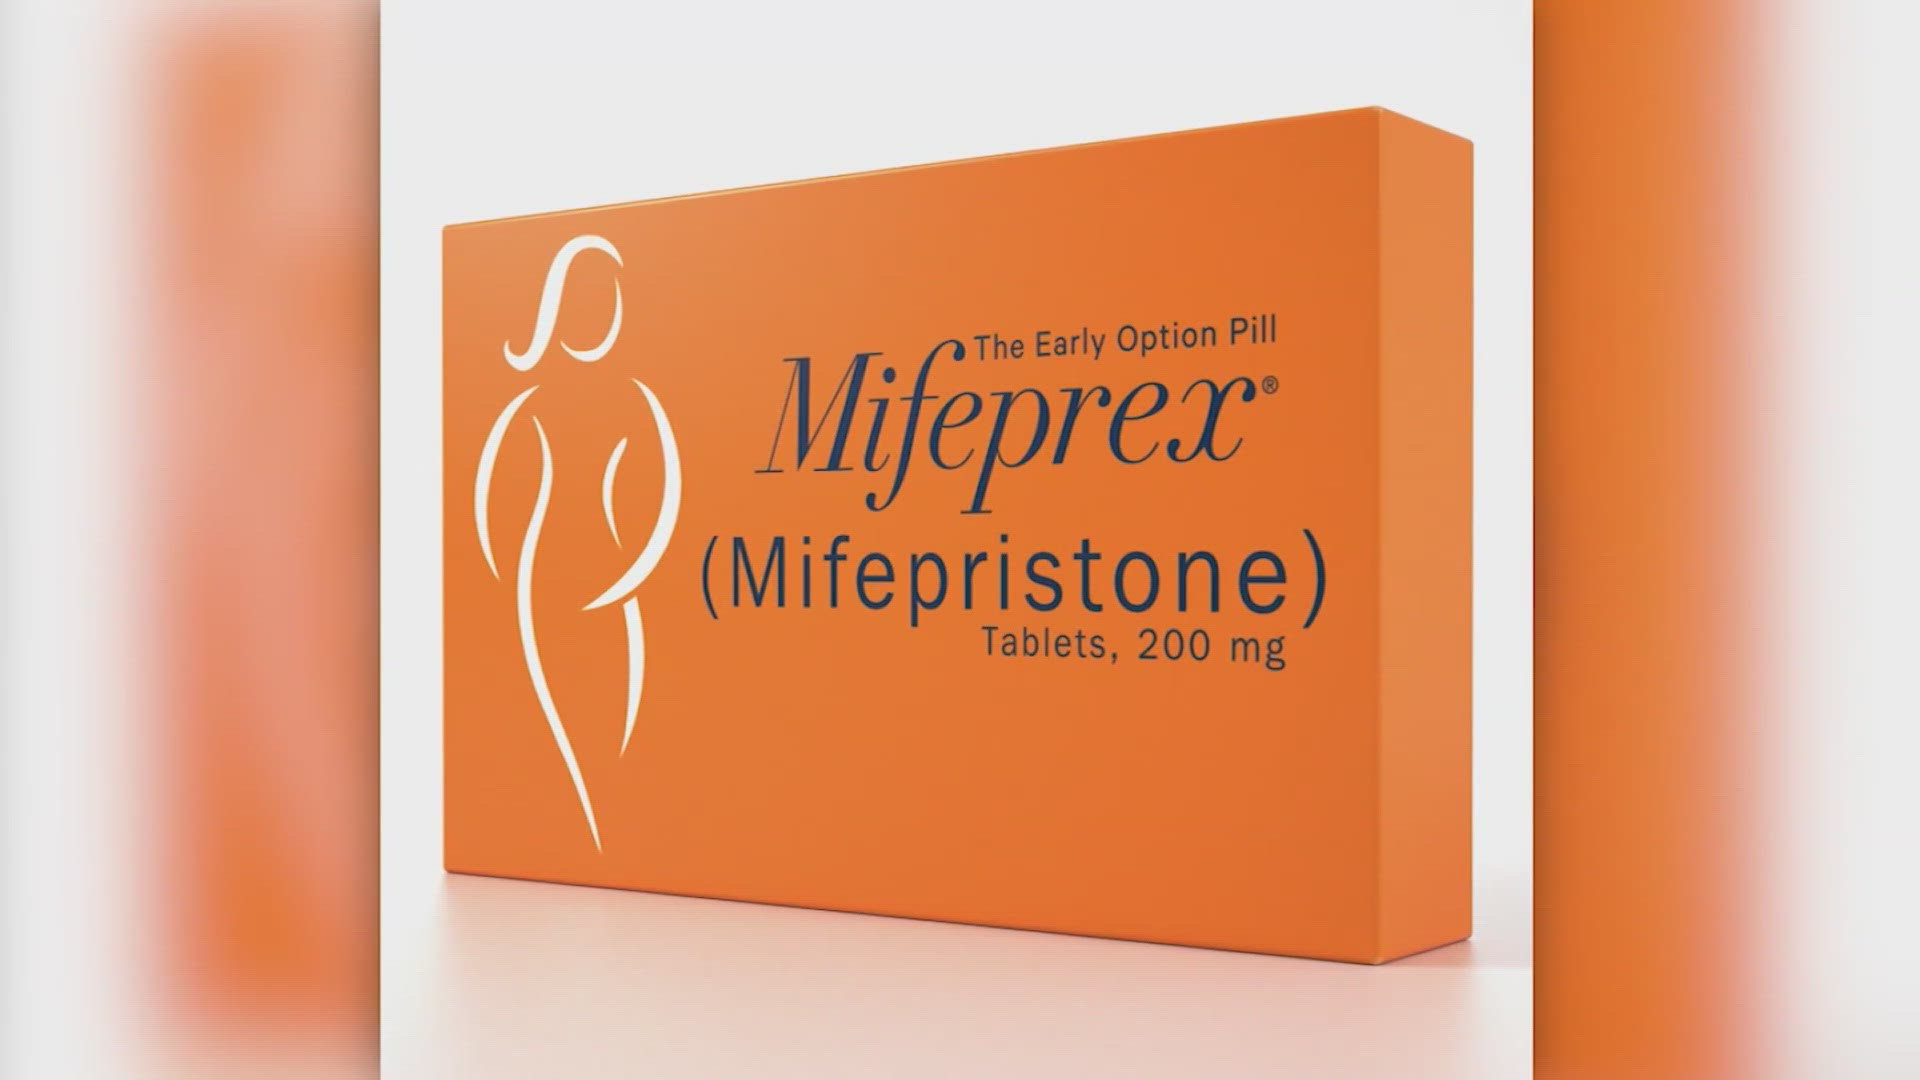 Anti-abortion advocates are asking the courts to pull mifepristone off the market nationwide, including in states where it remains legal.